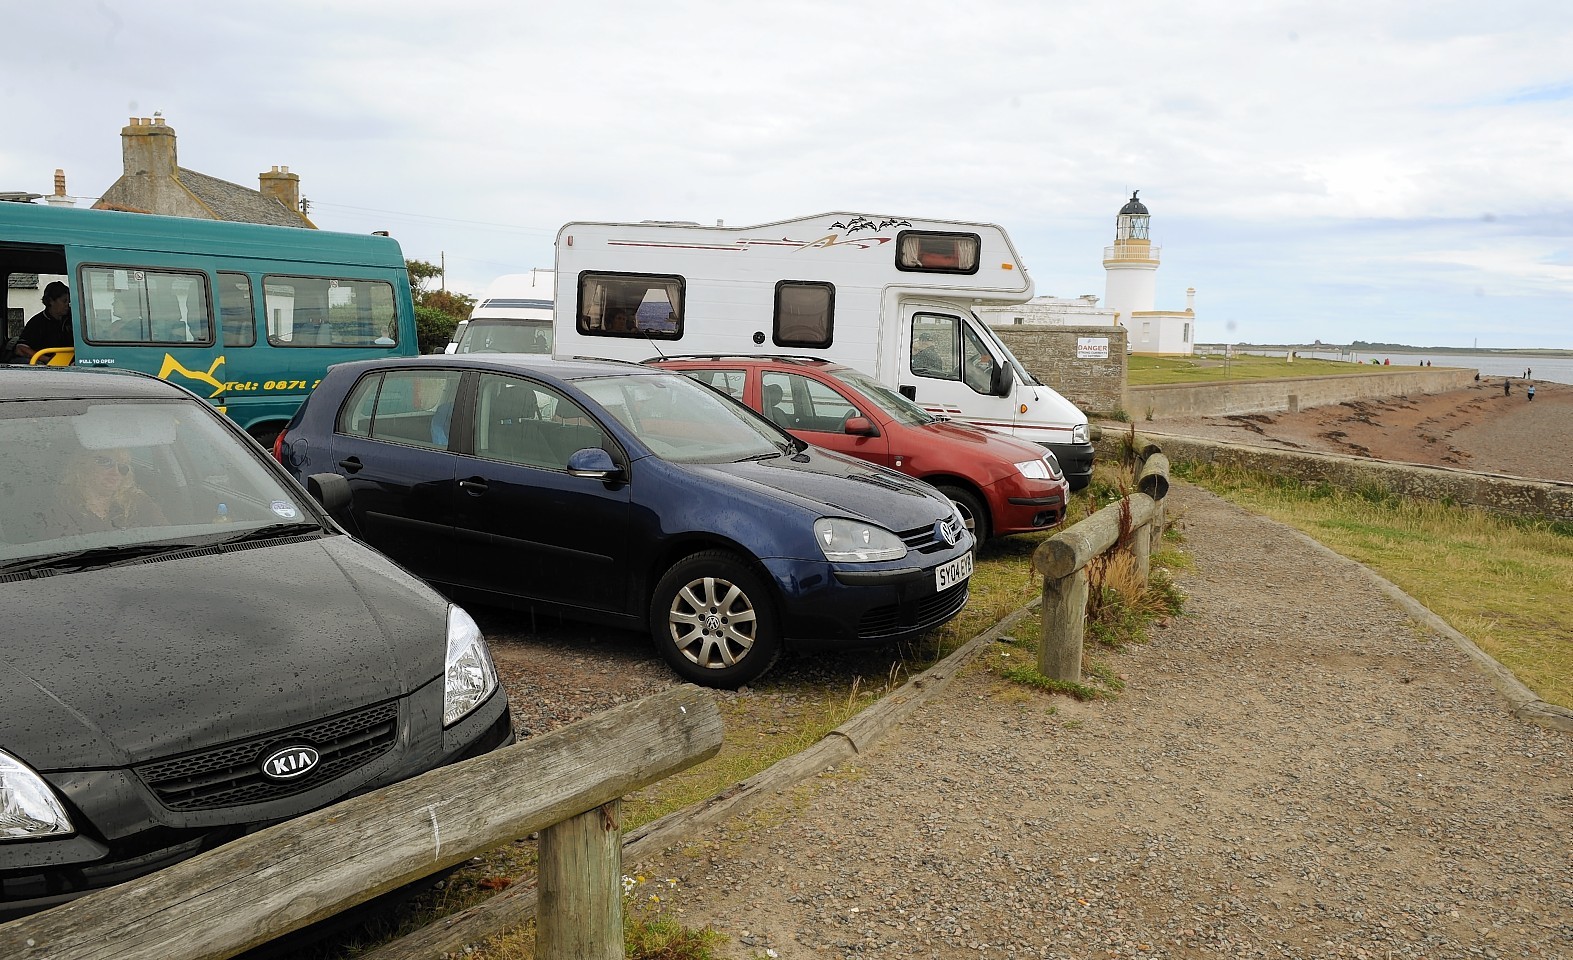 The existing facilities at Chanonry Point